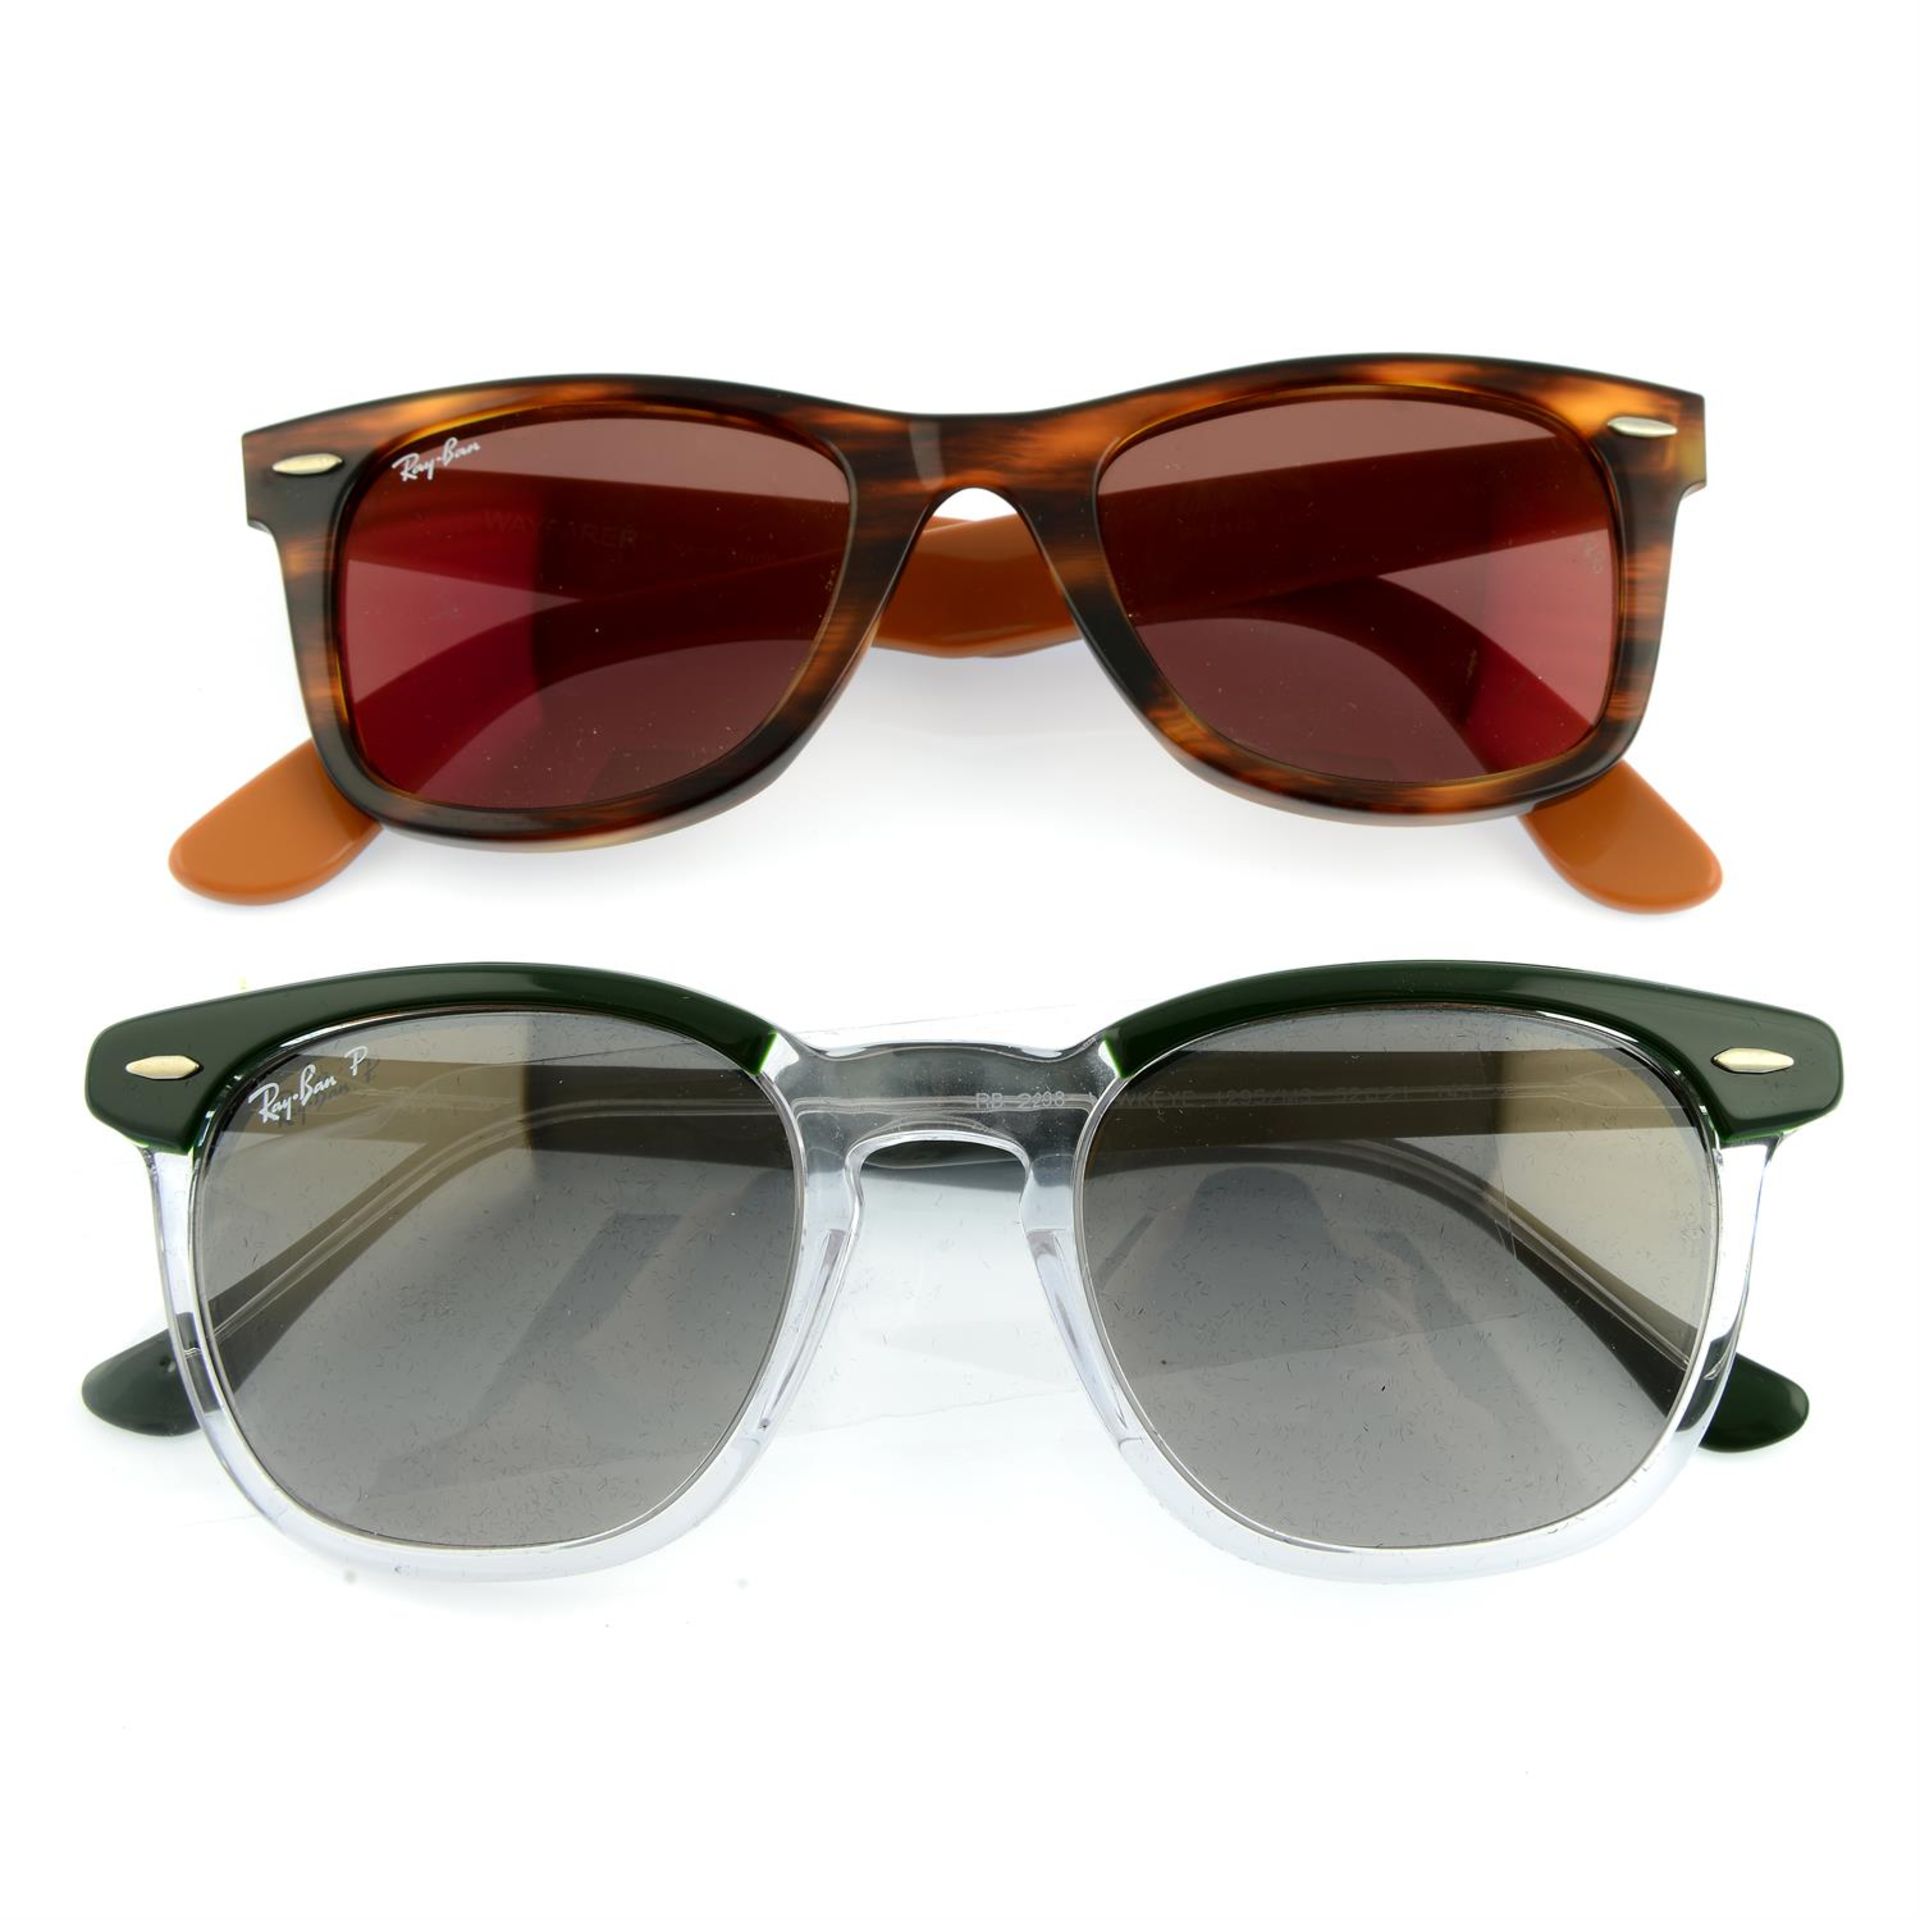 RAY-BAN - two pairs of sunglasses.